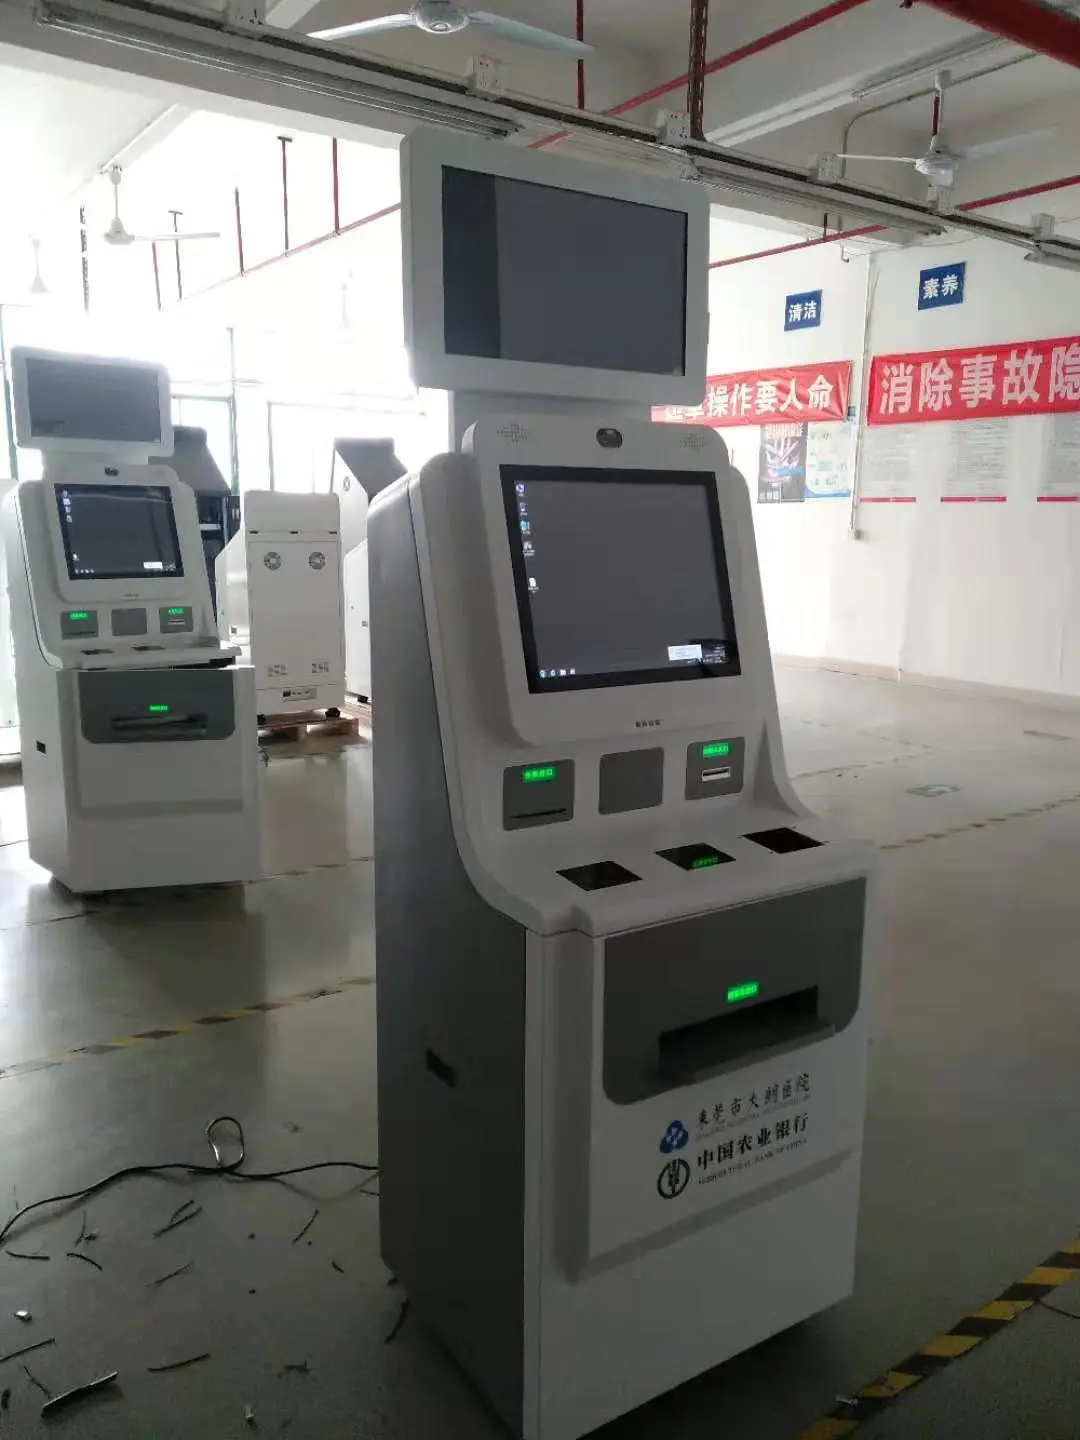 digital signage hospital clinic kiosk for patients supporting bank card sociel security card